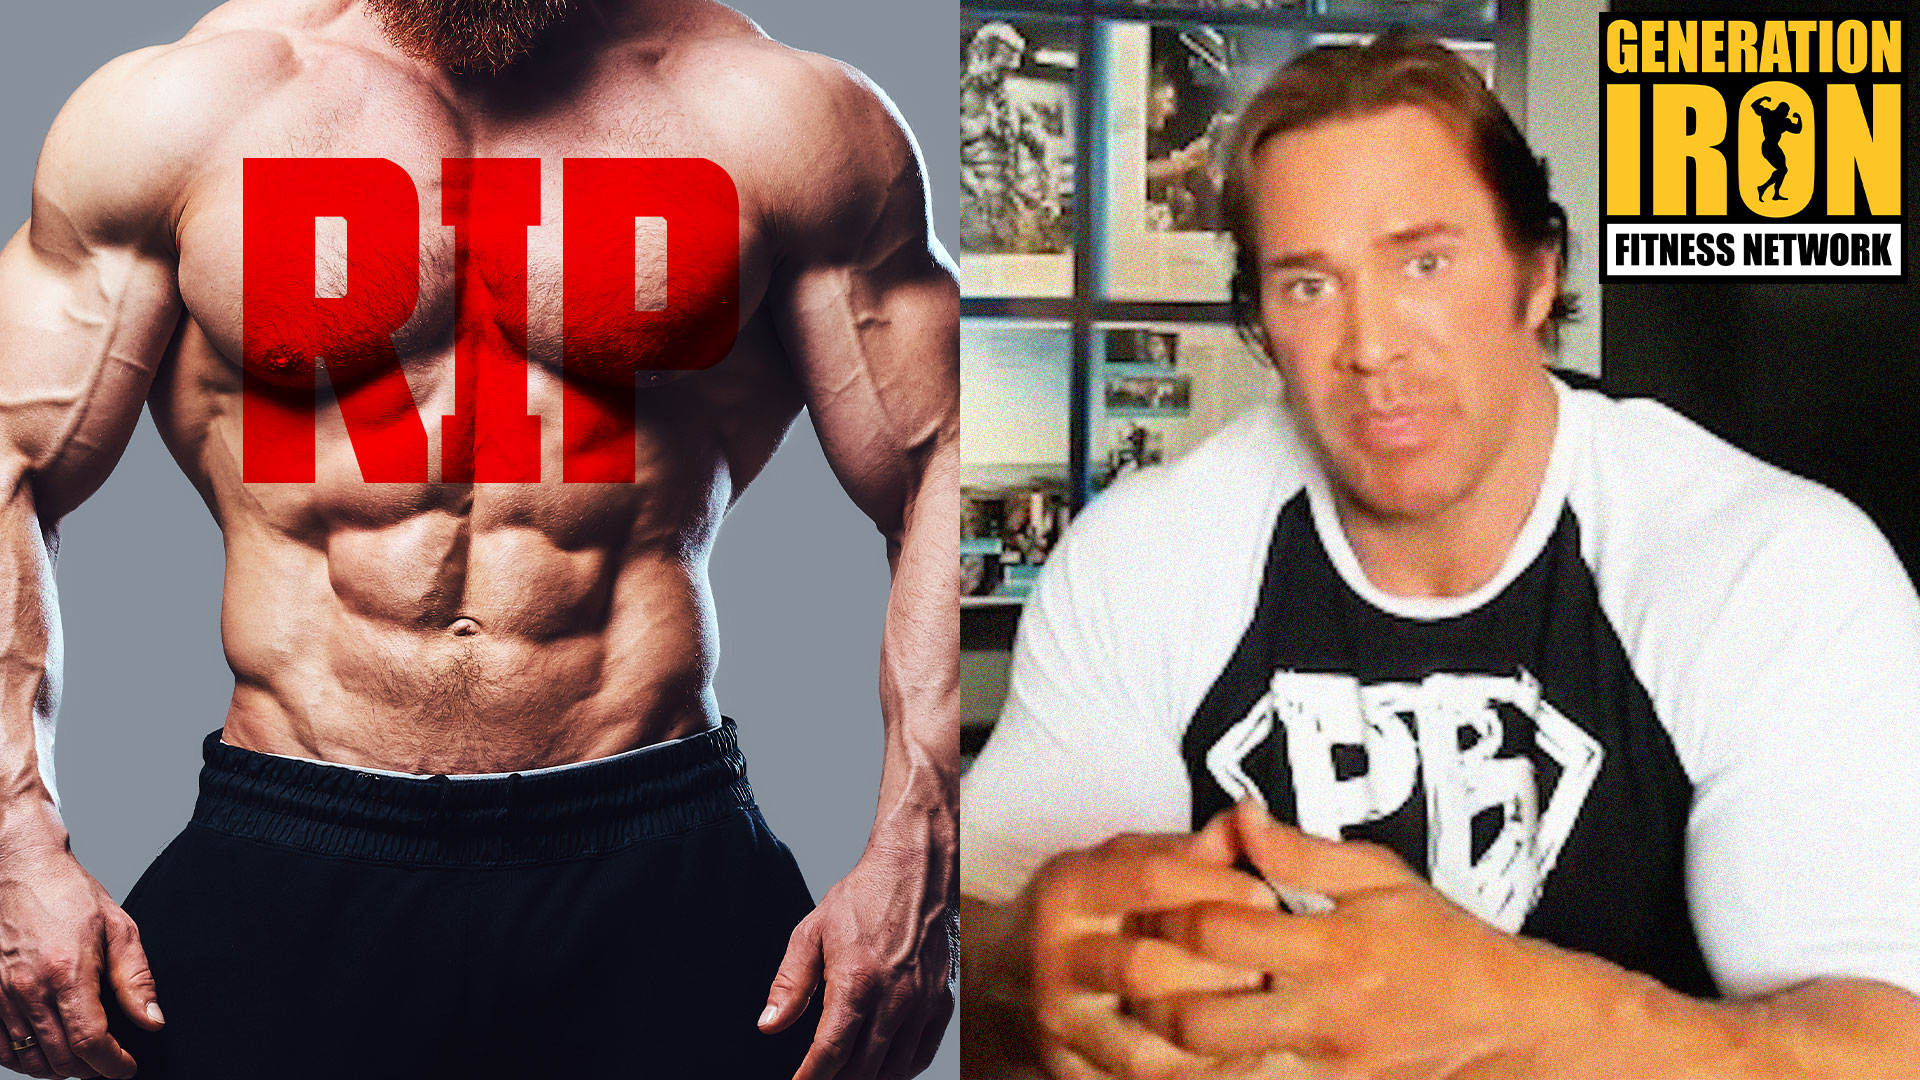 Mike O’Hearn: Untimely Bodybuilding Deaths Are Not A Coincidence. It’s Due To Abuse